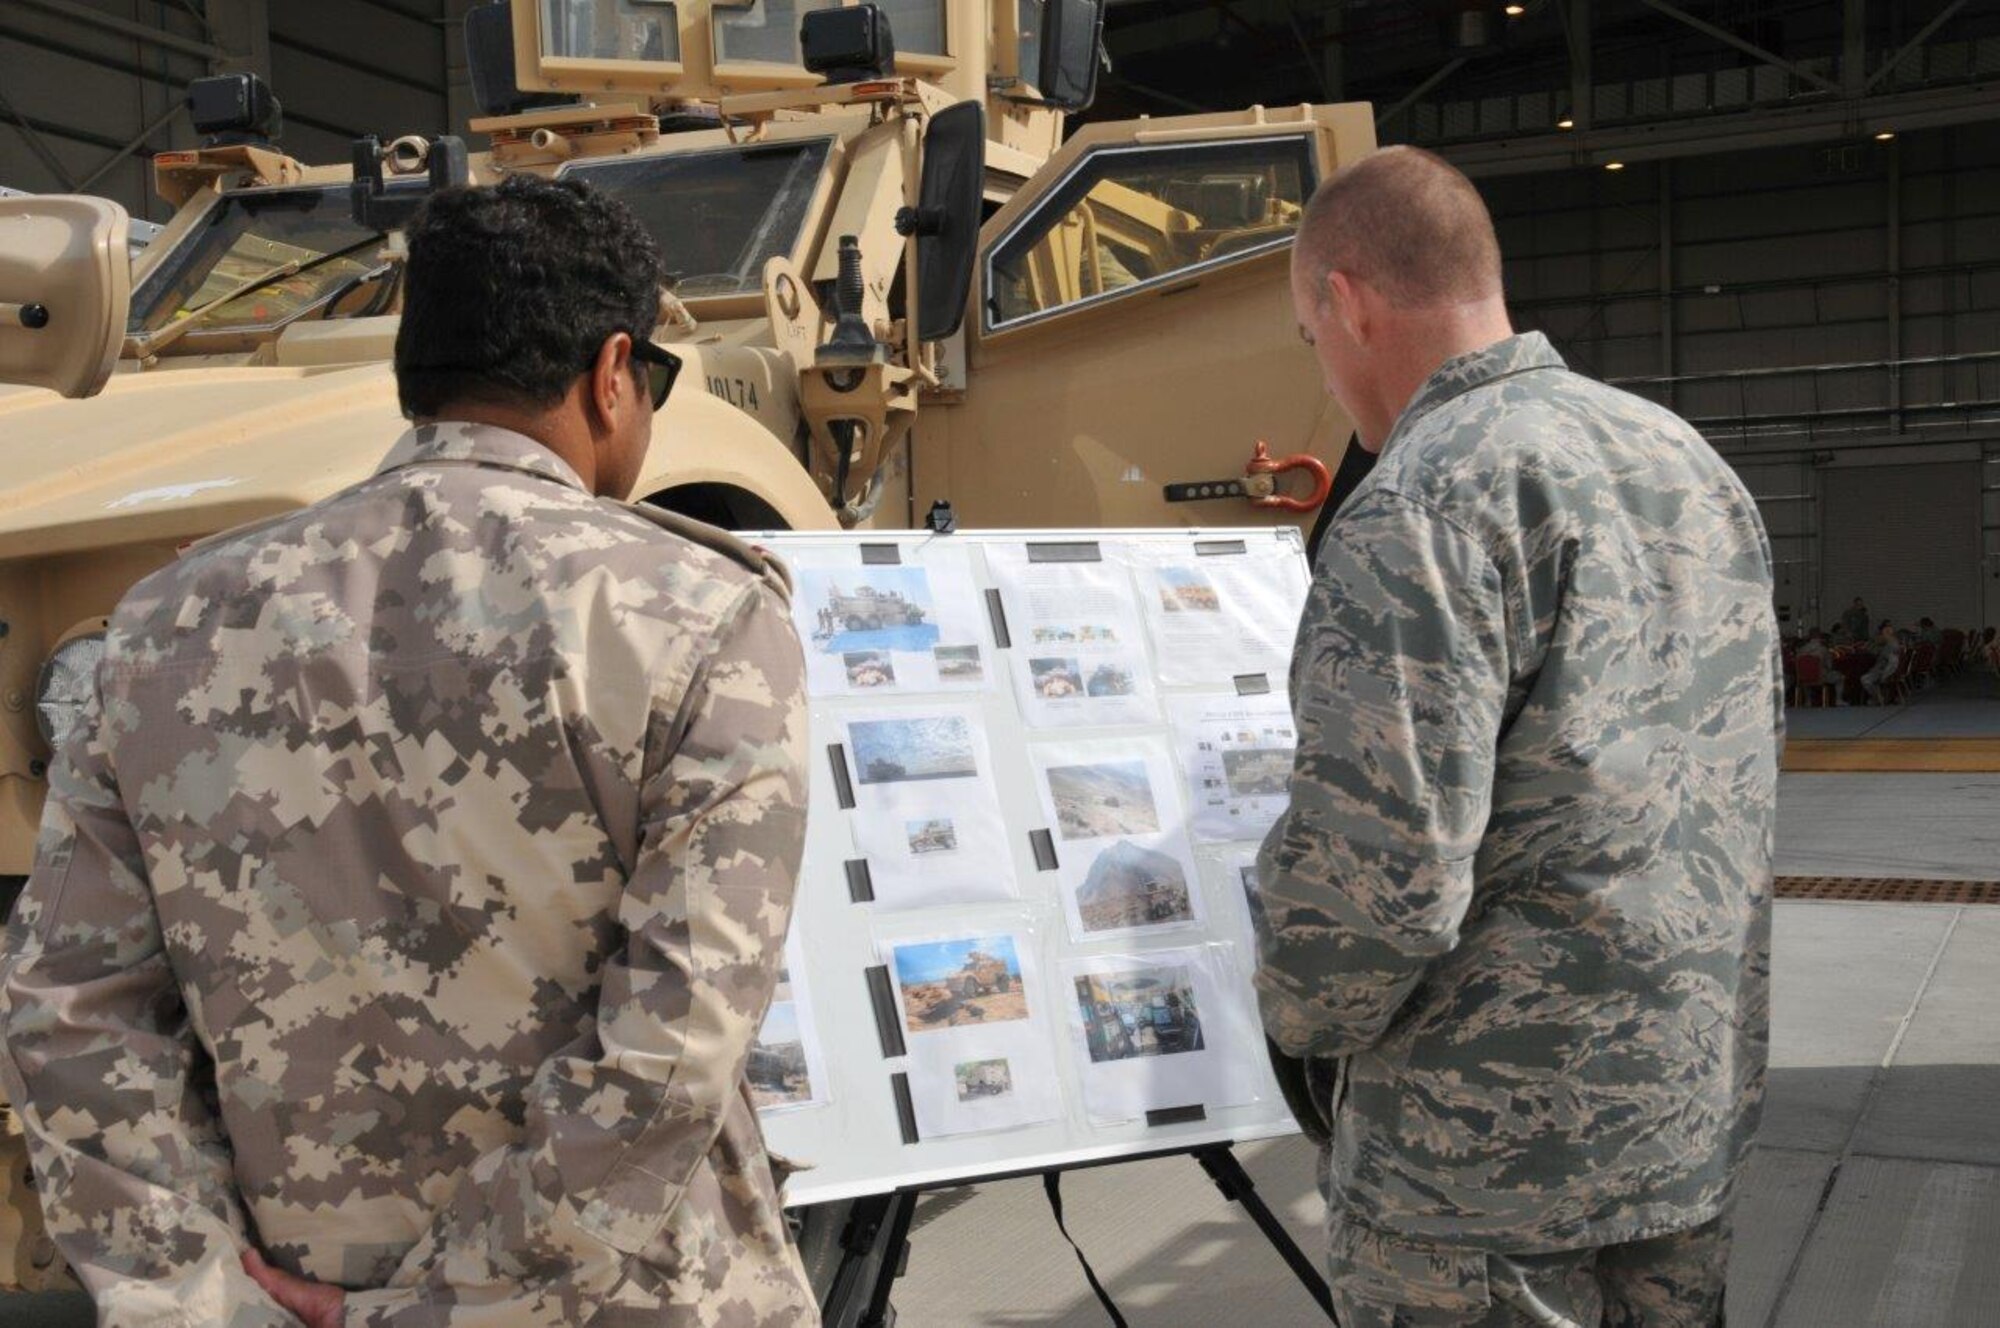 Brig. Gen. Darren Jones (right), 379th Air Expeditionary Wing commander, shows a member of the Qatar military a mine resistant protectant vehicle at Flight Line Fest at Al Udeid Air Base, Qatar Jan. 10. Flight Line Fest is a joint partnership between the 379th Air Expeditionary Wing and Qatar Emiri Air Force held to foster relations between Qatar and the United States. (U.S. Air Force photo by Tech. Sgt. Terrica Y. Jones)